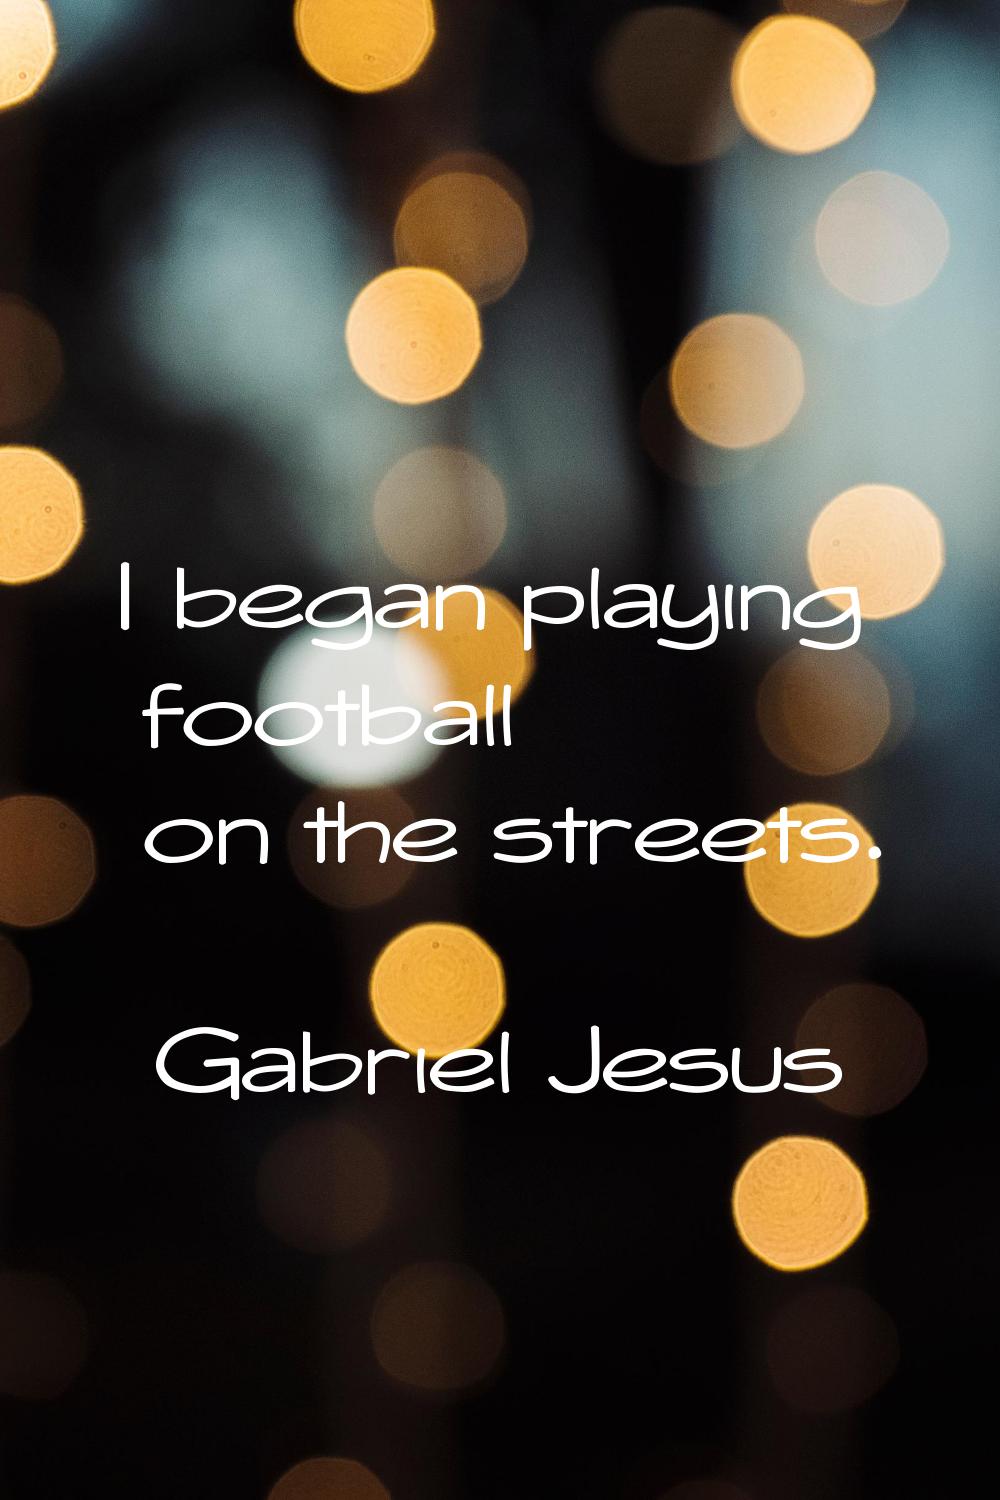 I began playing football on the streets.